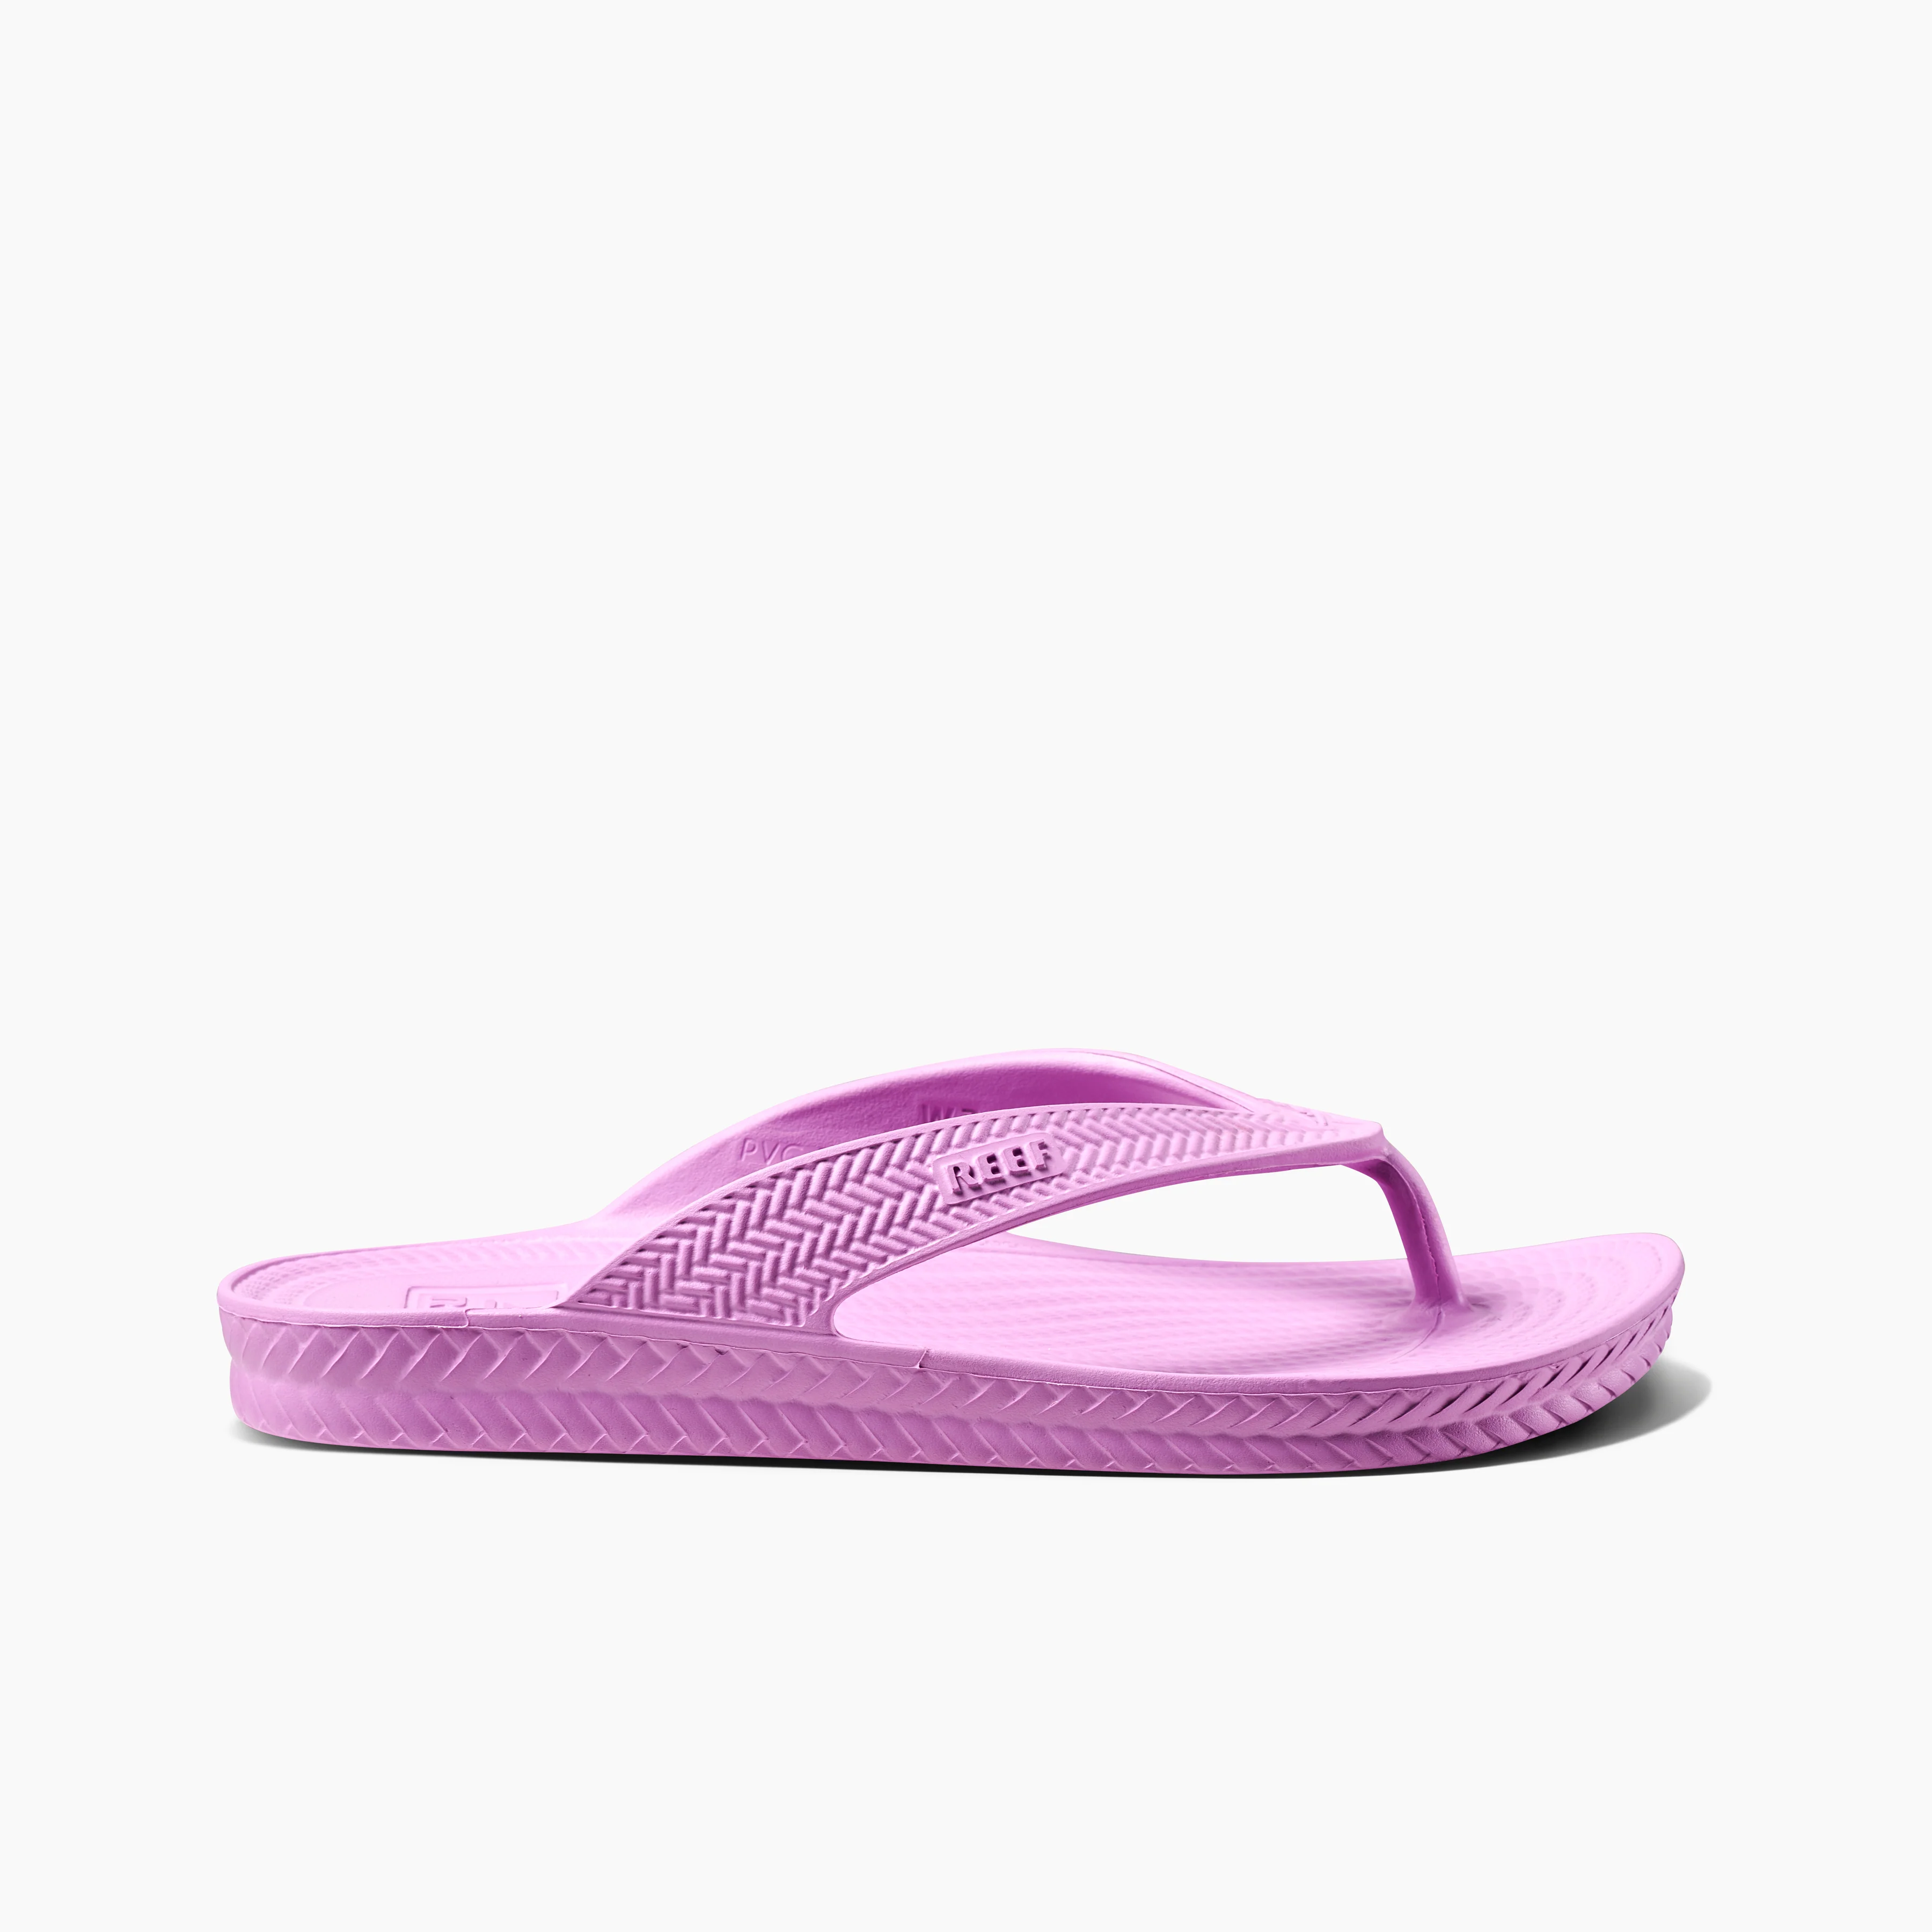 Women's Water Court Sandals in Taffy side view